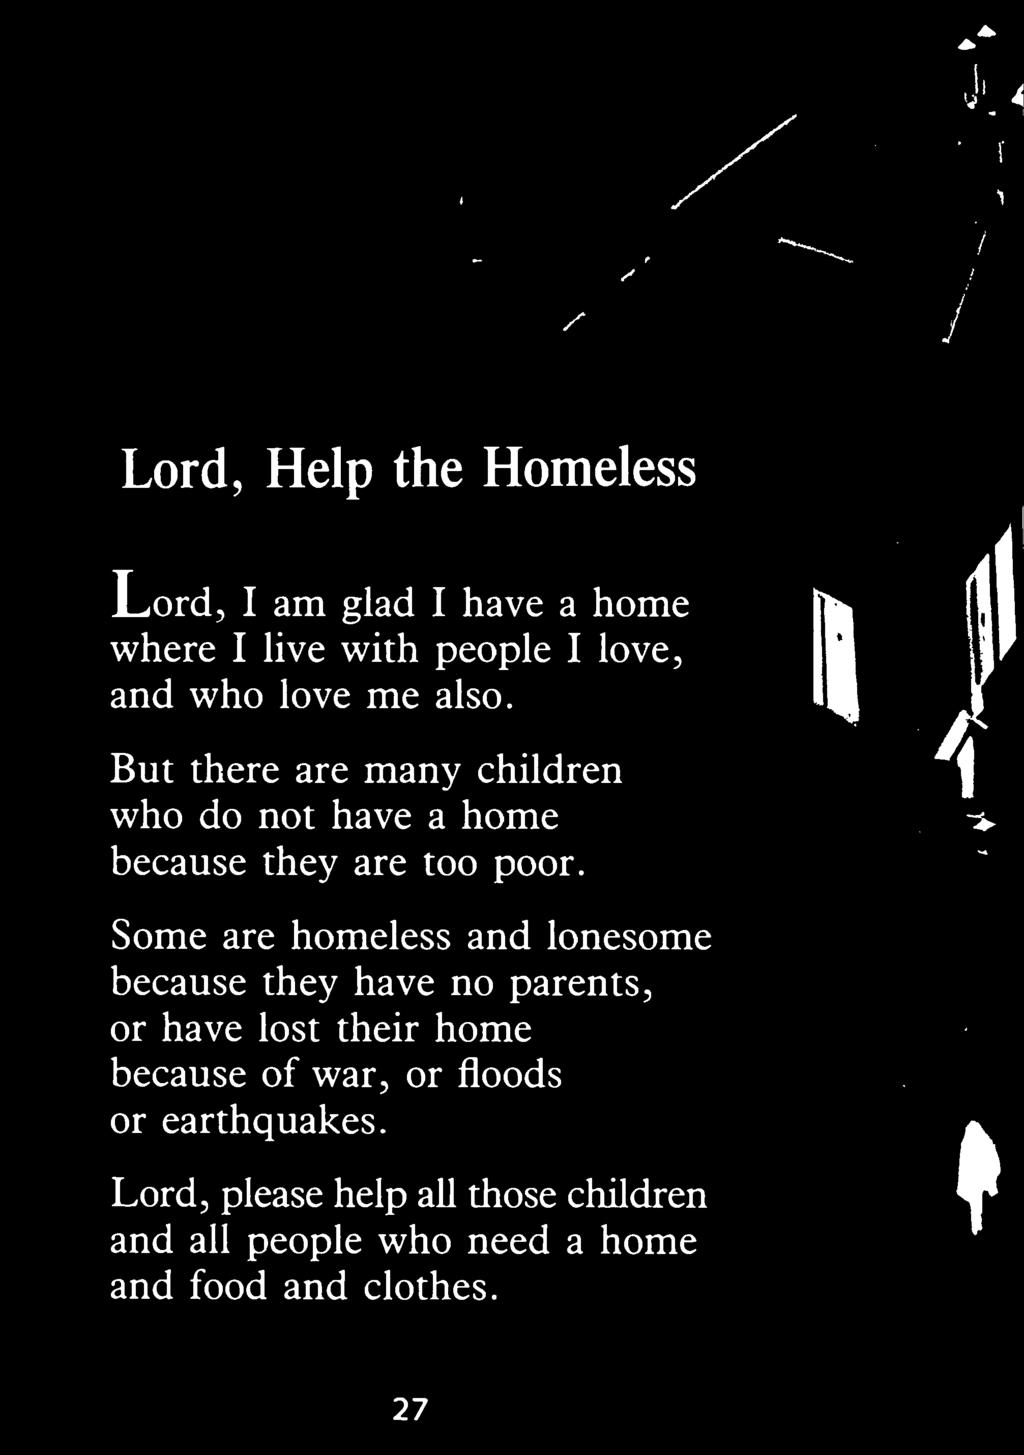 Some are homeless and lonesome because they have no parents, or